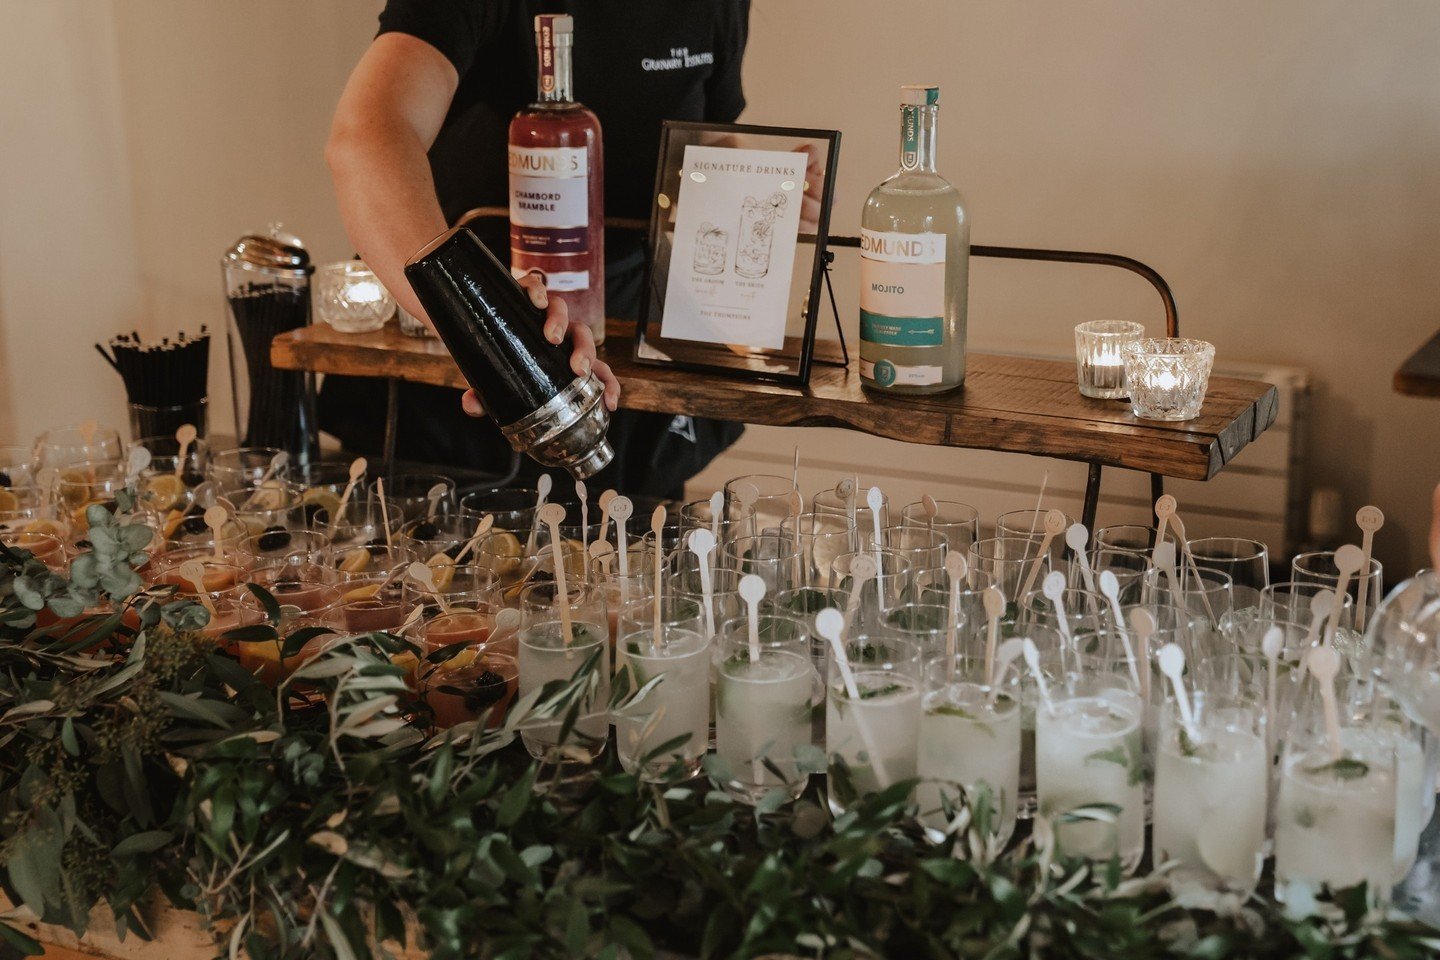 Are you aware that we have a special package for an evening cocktail bar? ⁠
⁠
You can choose from a variety of cocktails such as Mojito, Passionfruit Martini, Bramble, or Espresso Martini. You can enjoy two cocktails from the award-winning Edmunds ra